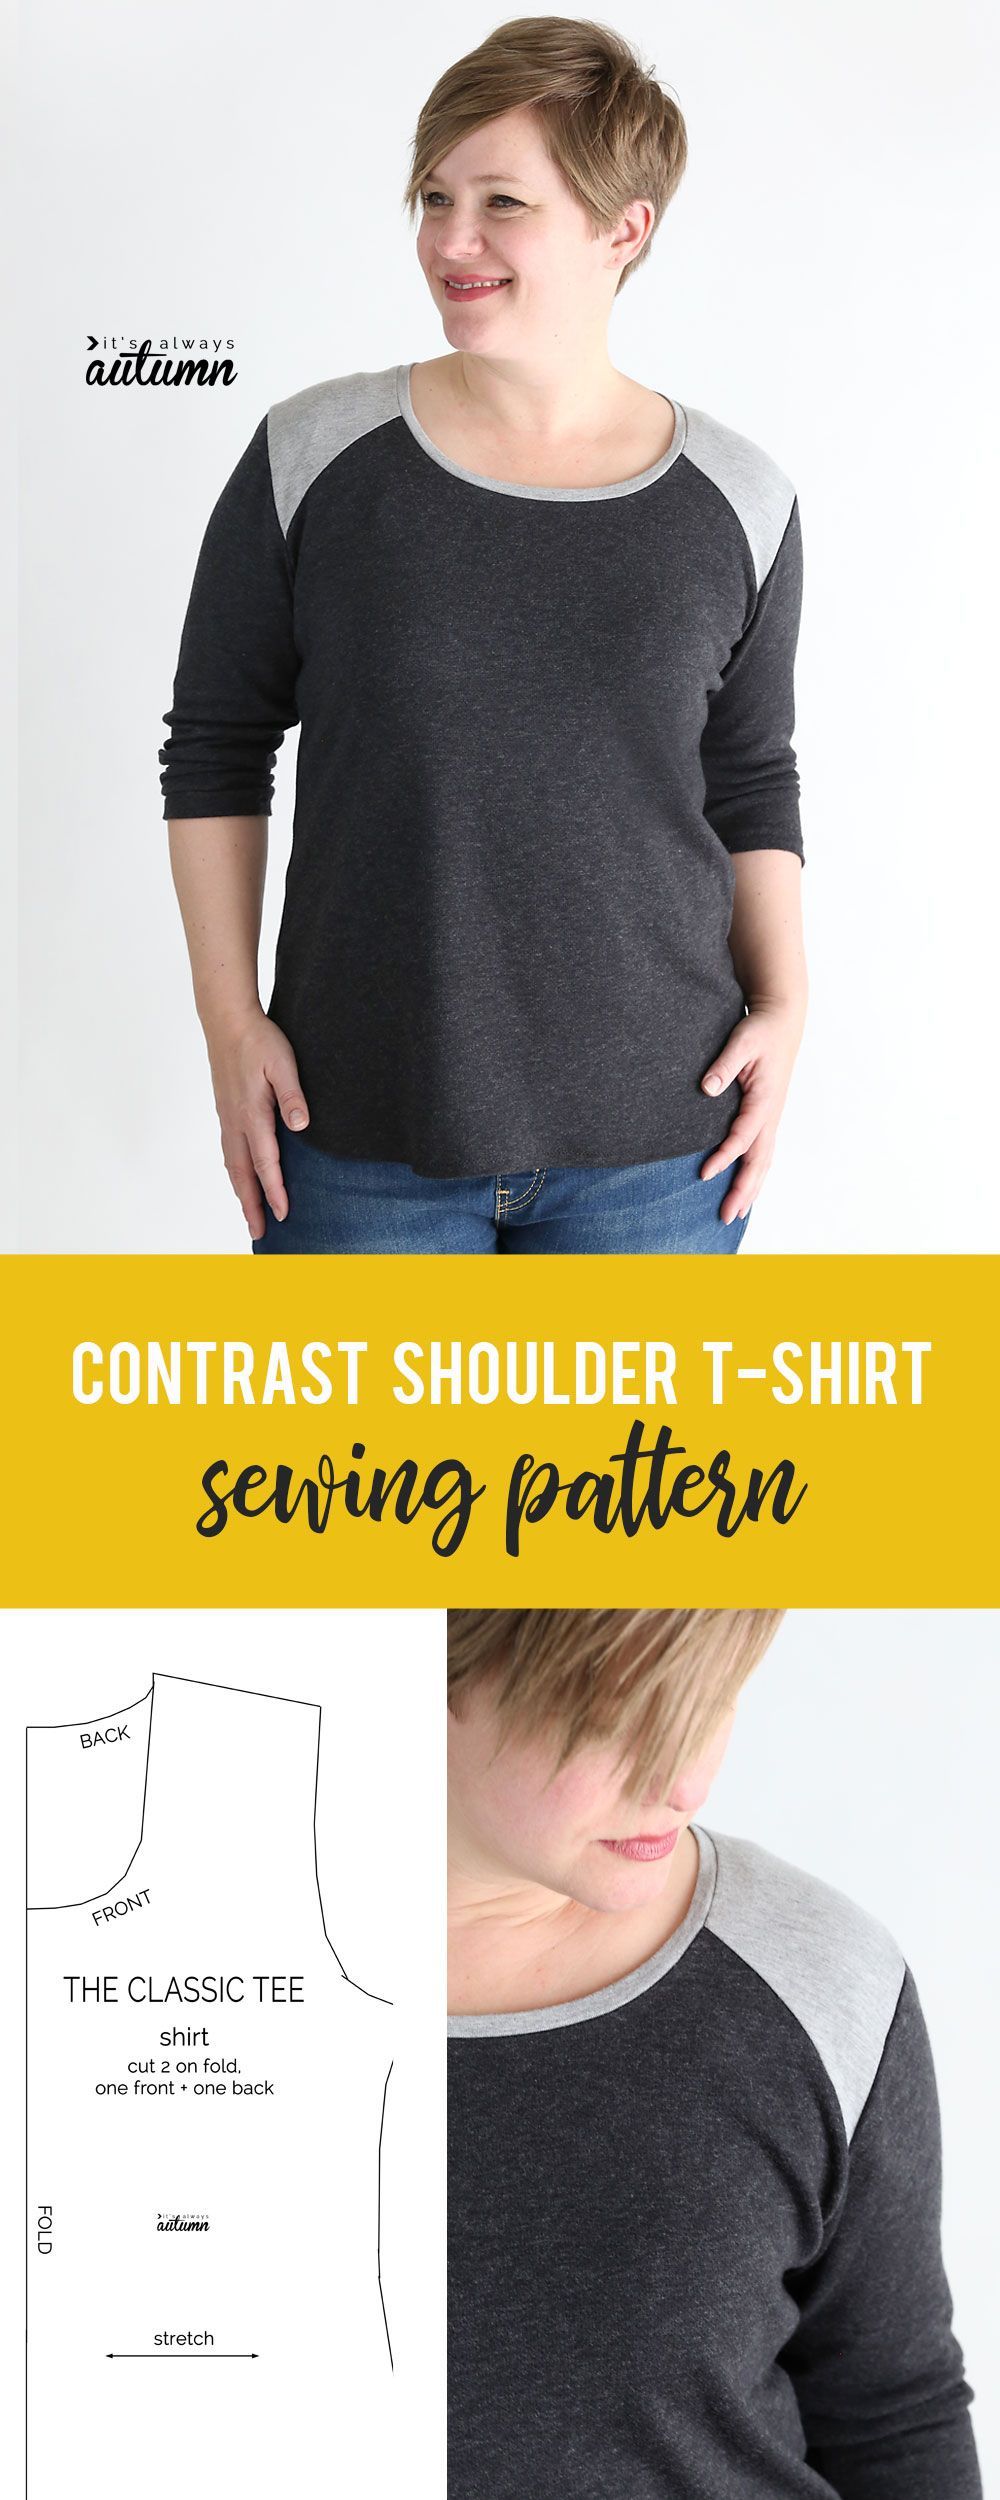 How to sew a women's t-shirt with a contrast shoulder -   20 fabric crafts Toys sewing tutorials
 ideas